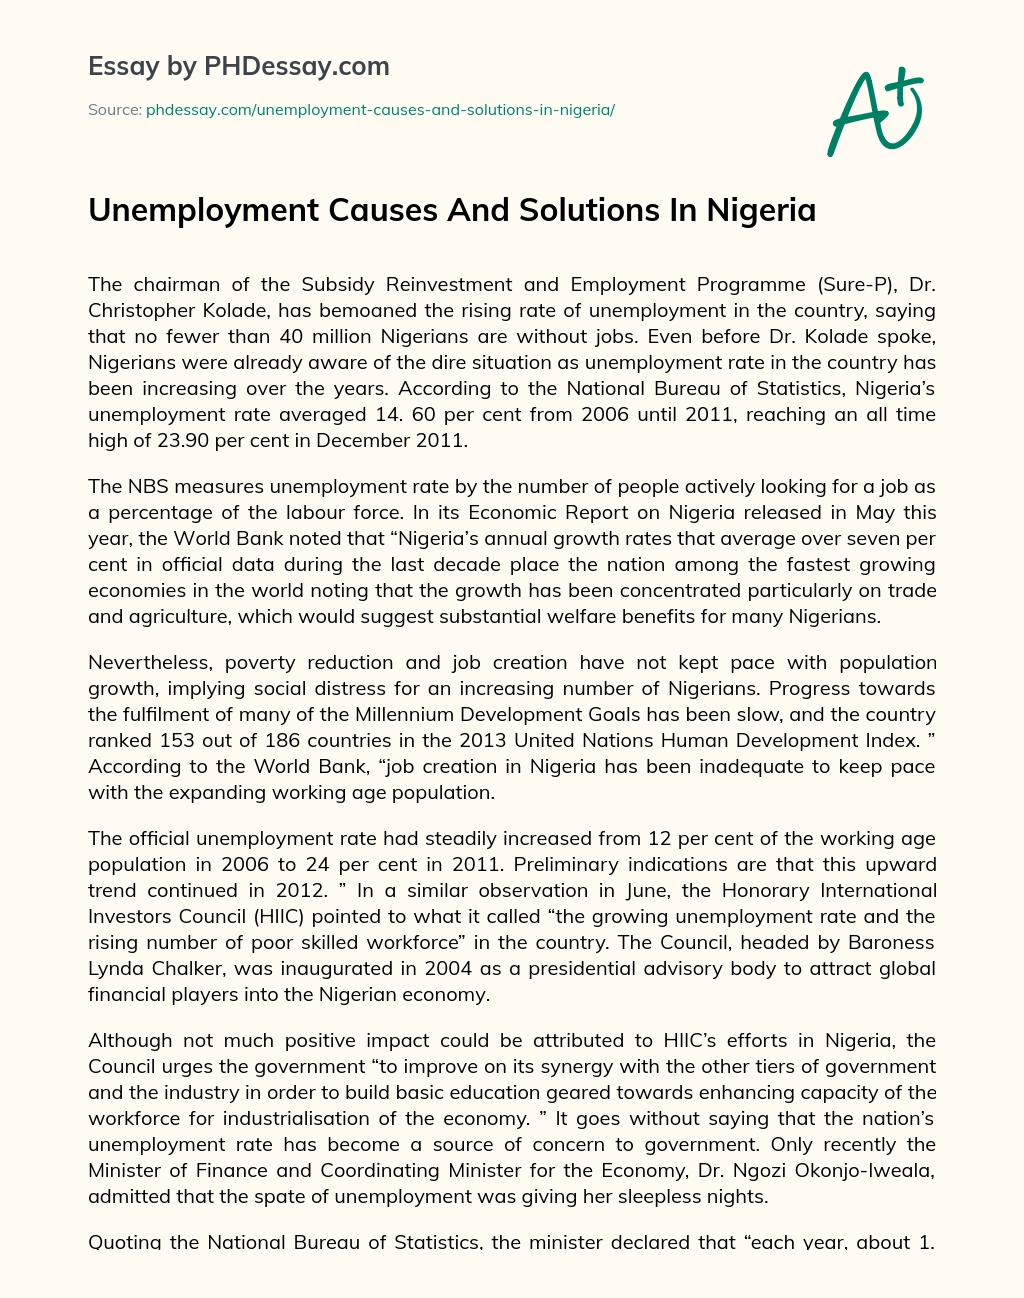 Unemployment Causes And Solutions In Nigeria essay